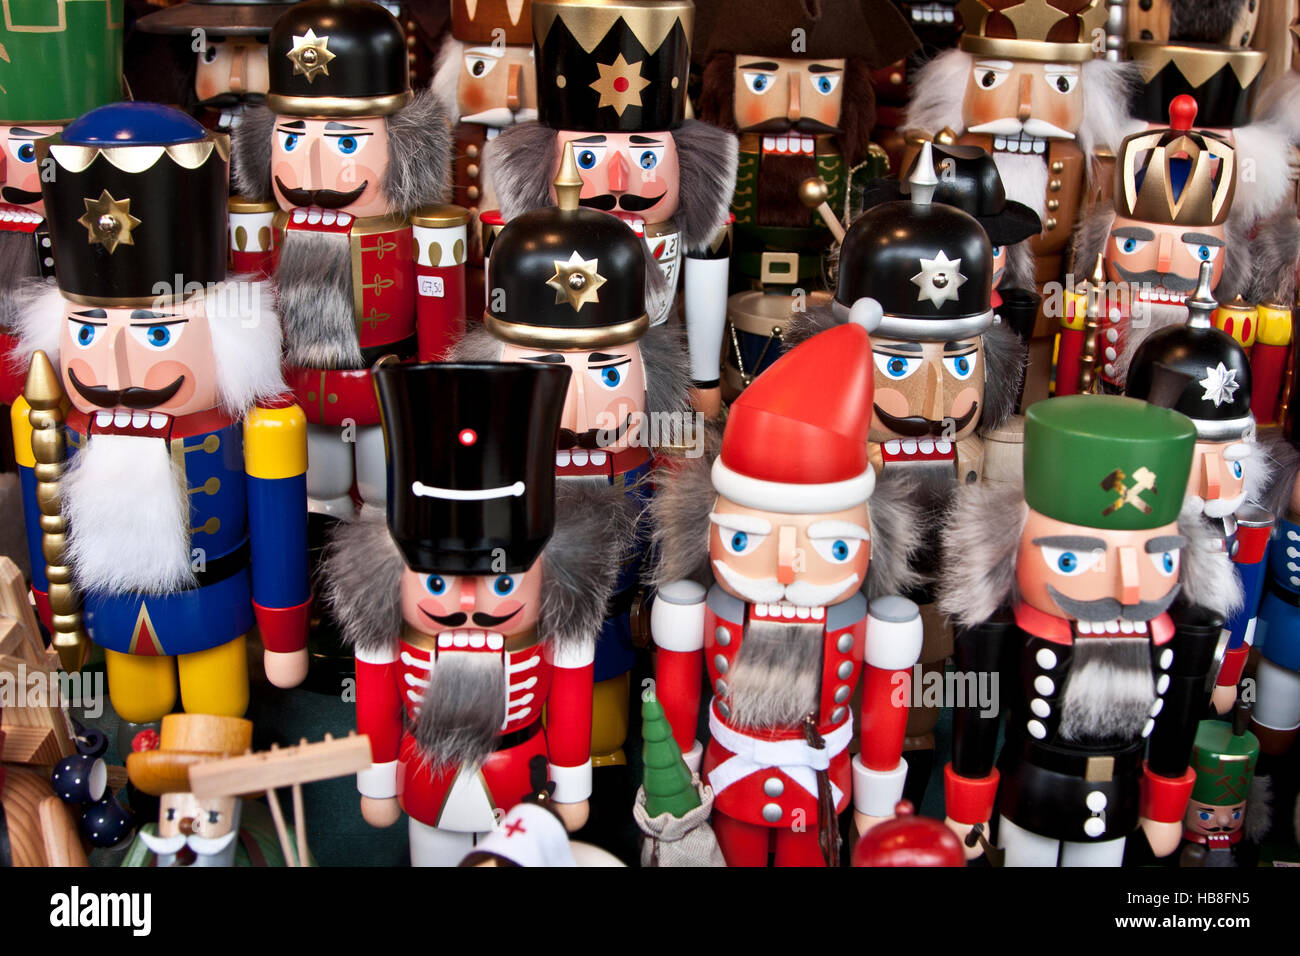 Christmas Fair Market at Ludwigsberg, Germany, wooden soldiers, Santa Claus, policemen, on sale at Christmas, Holiday, market, Stock Photo